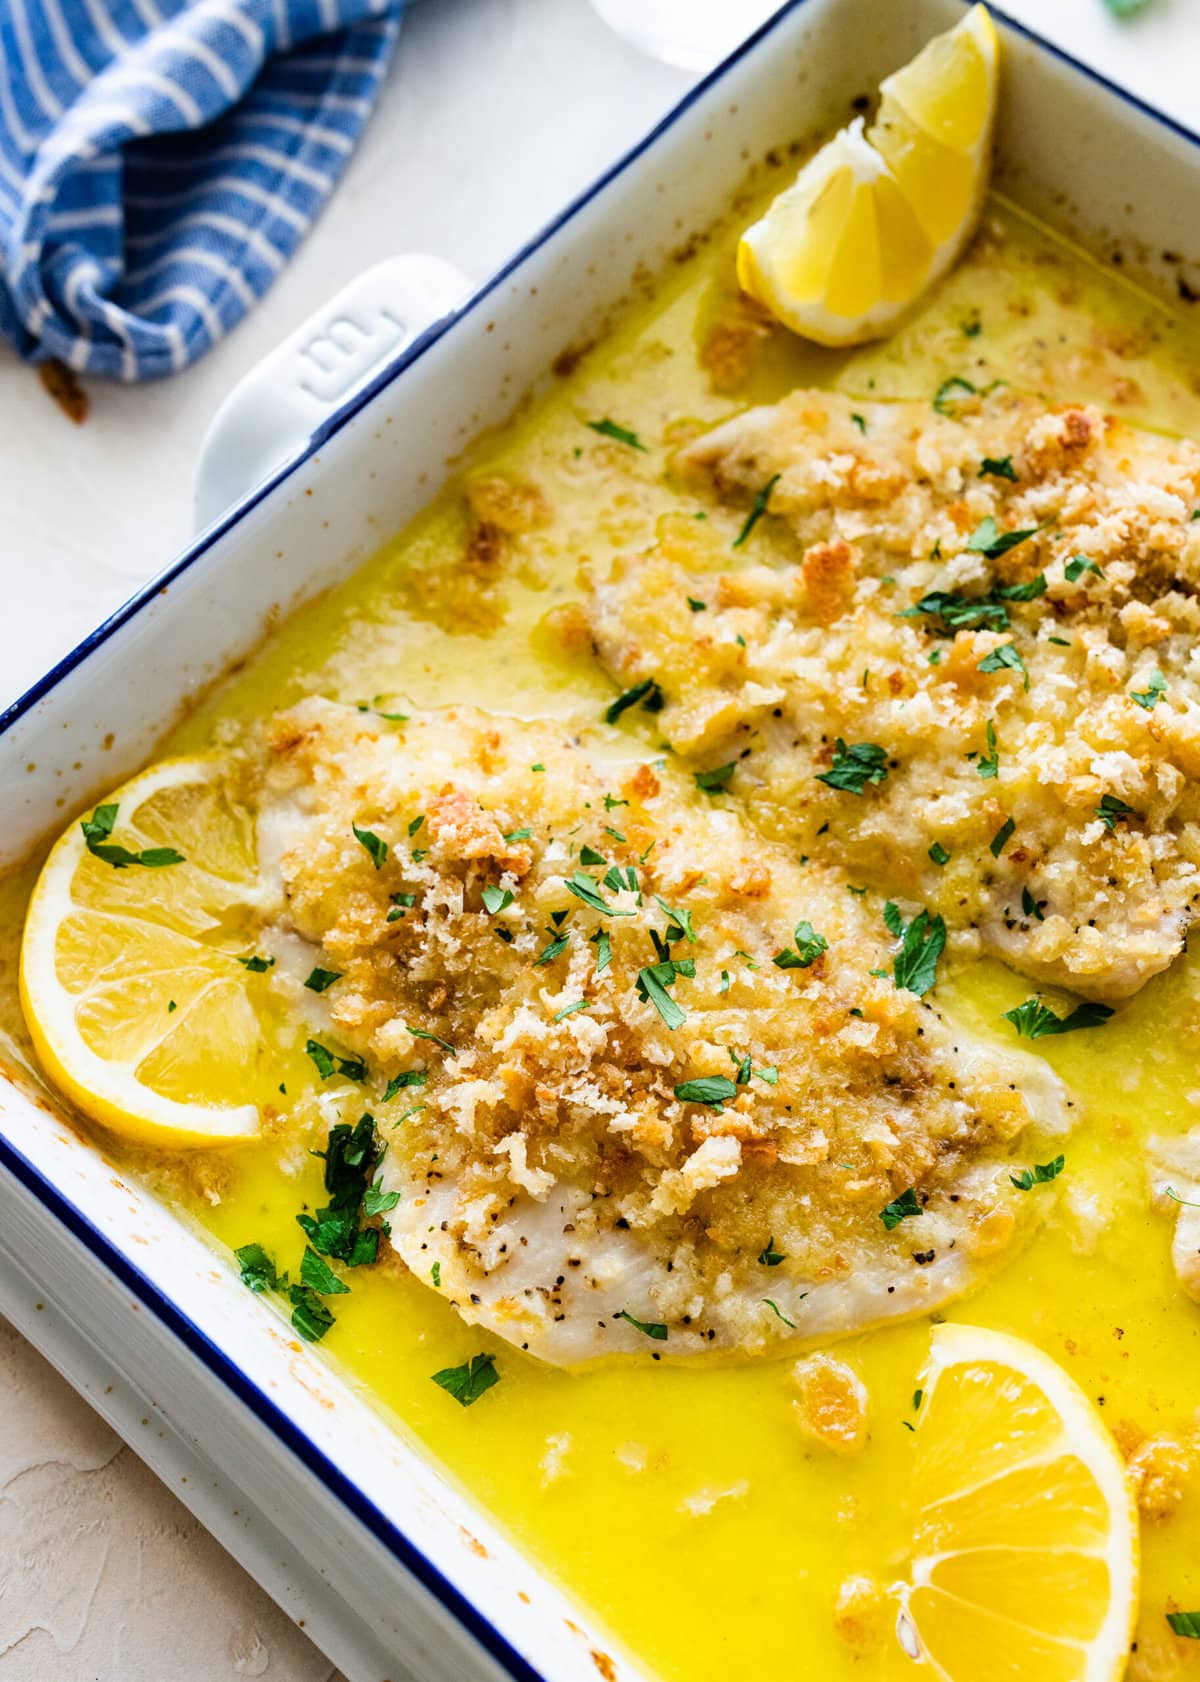 Baked Flounder Recipe with Lemon- fish with sauce after it is baked. Serve with lemon wedges.